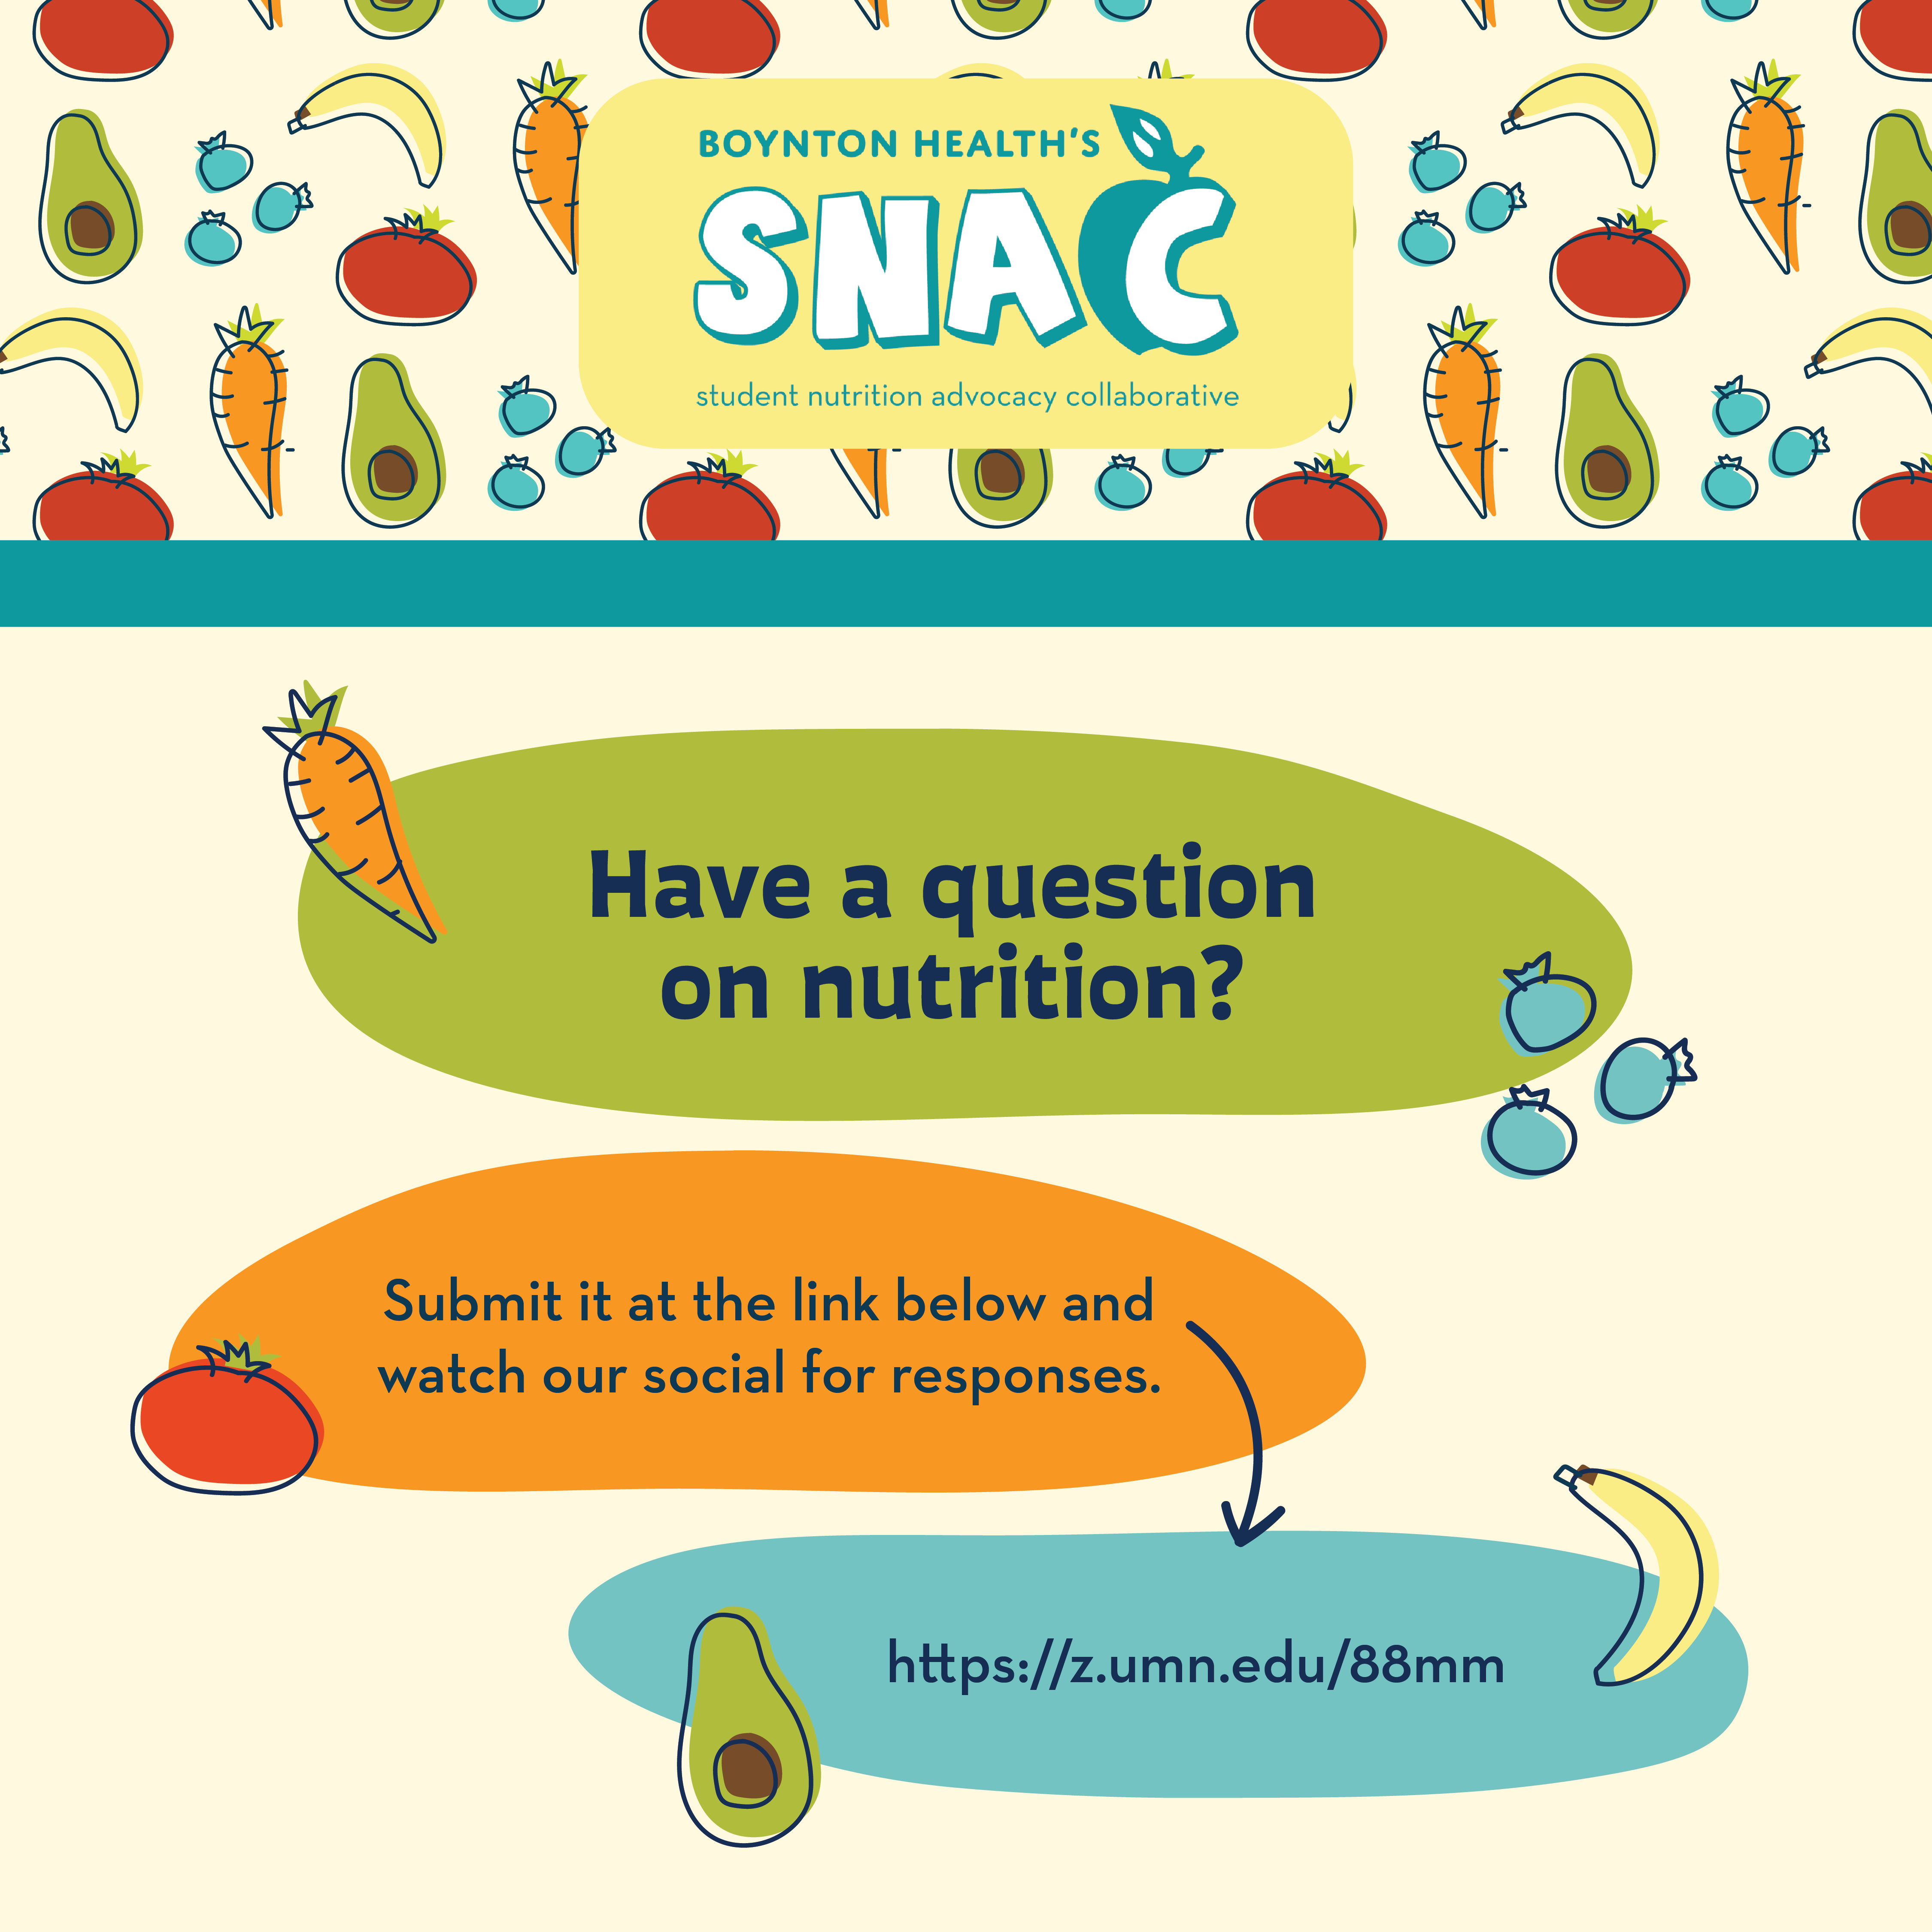 graphic with the text "SNAC" and fruit graphics with a link to ask nutrition questions